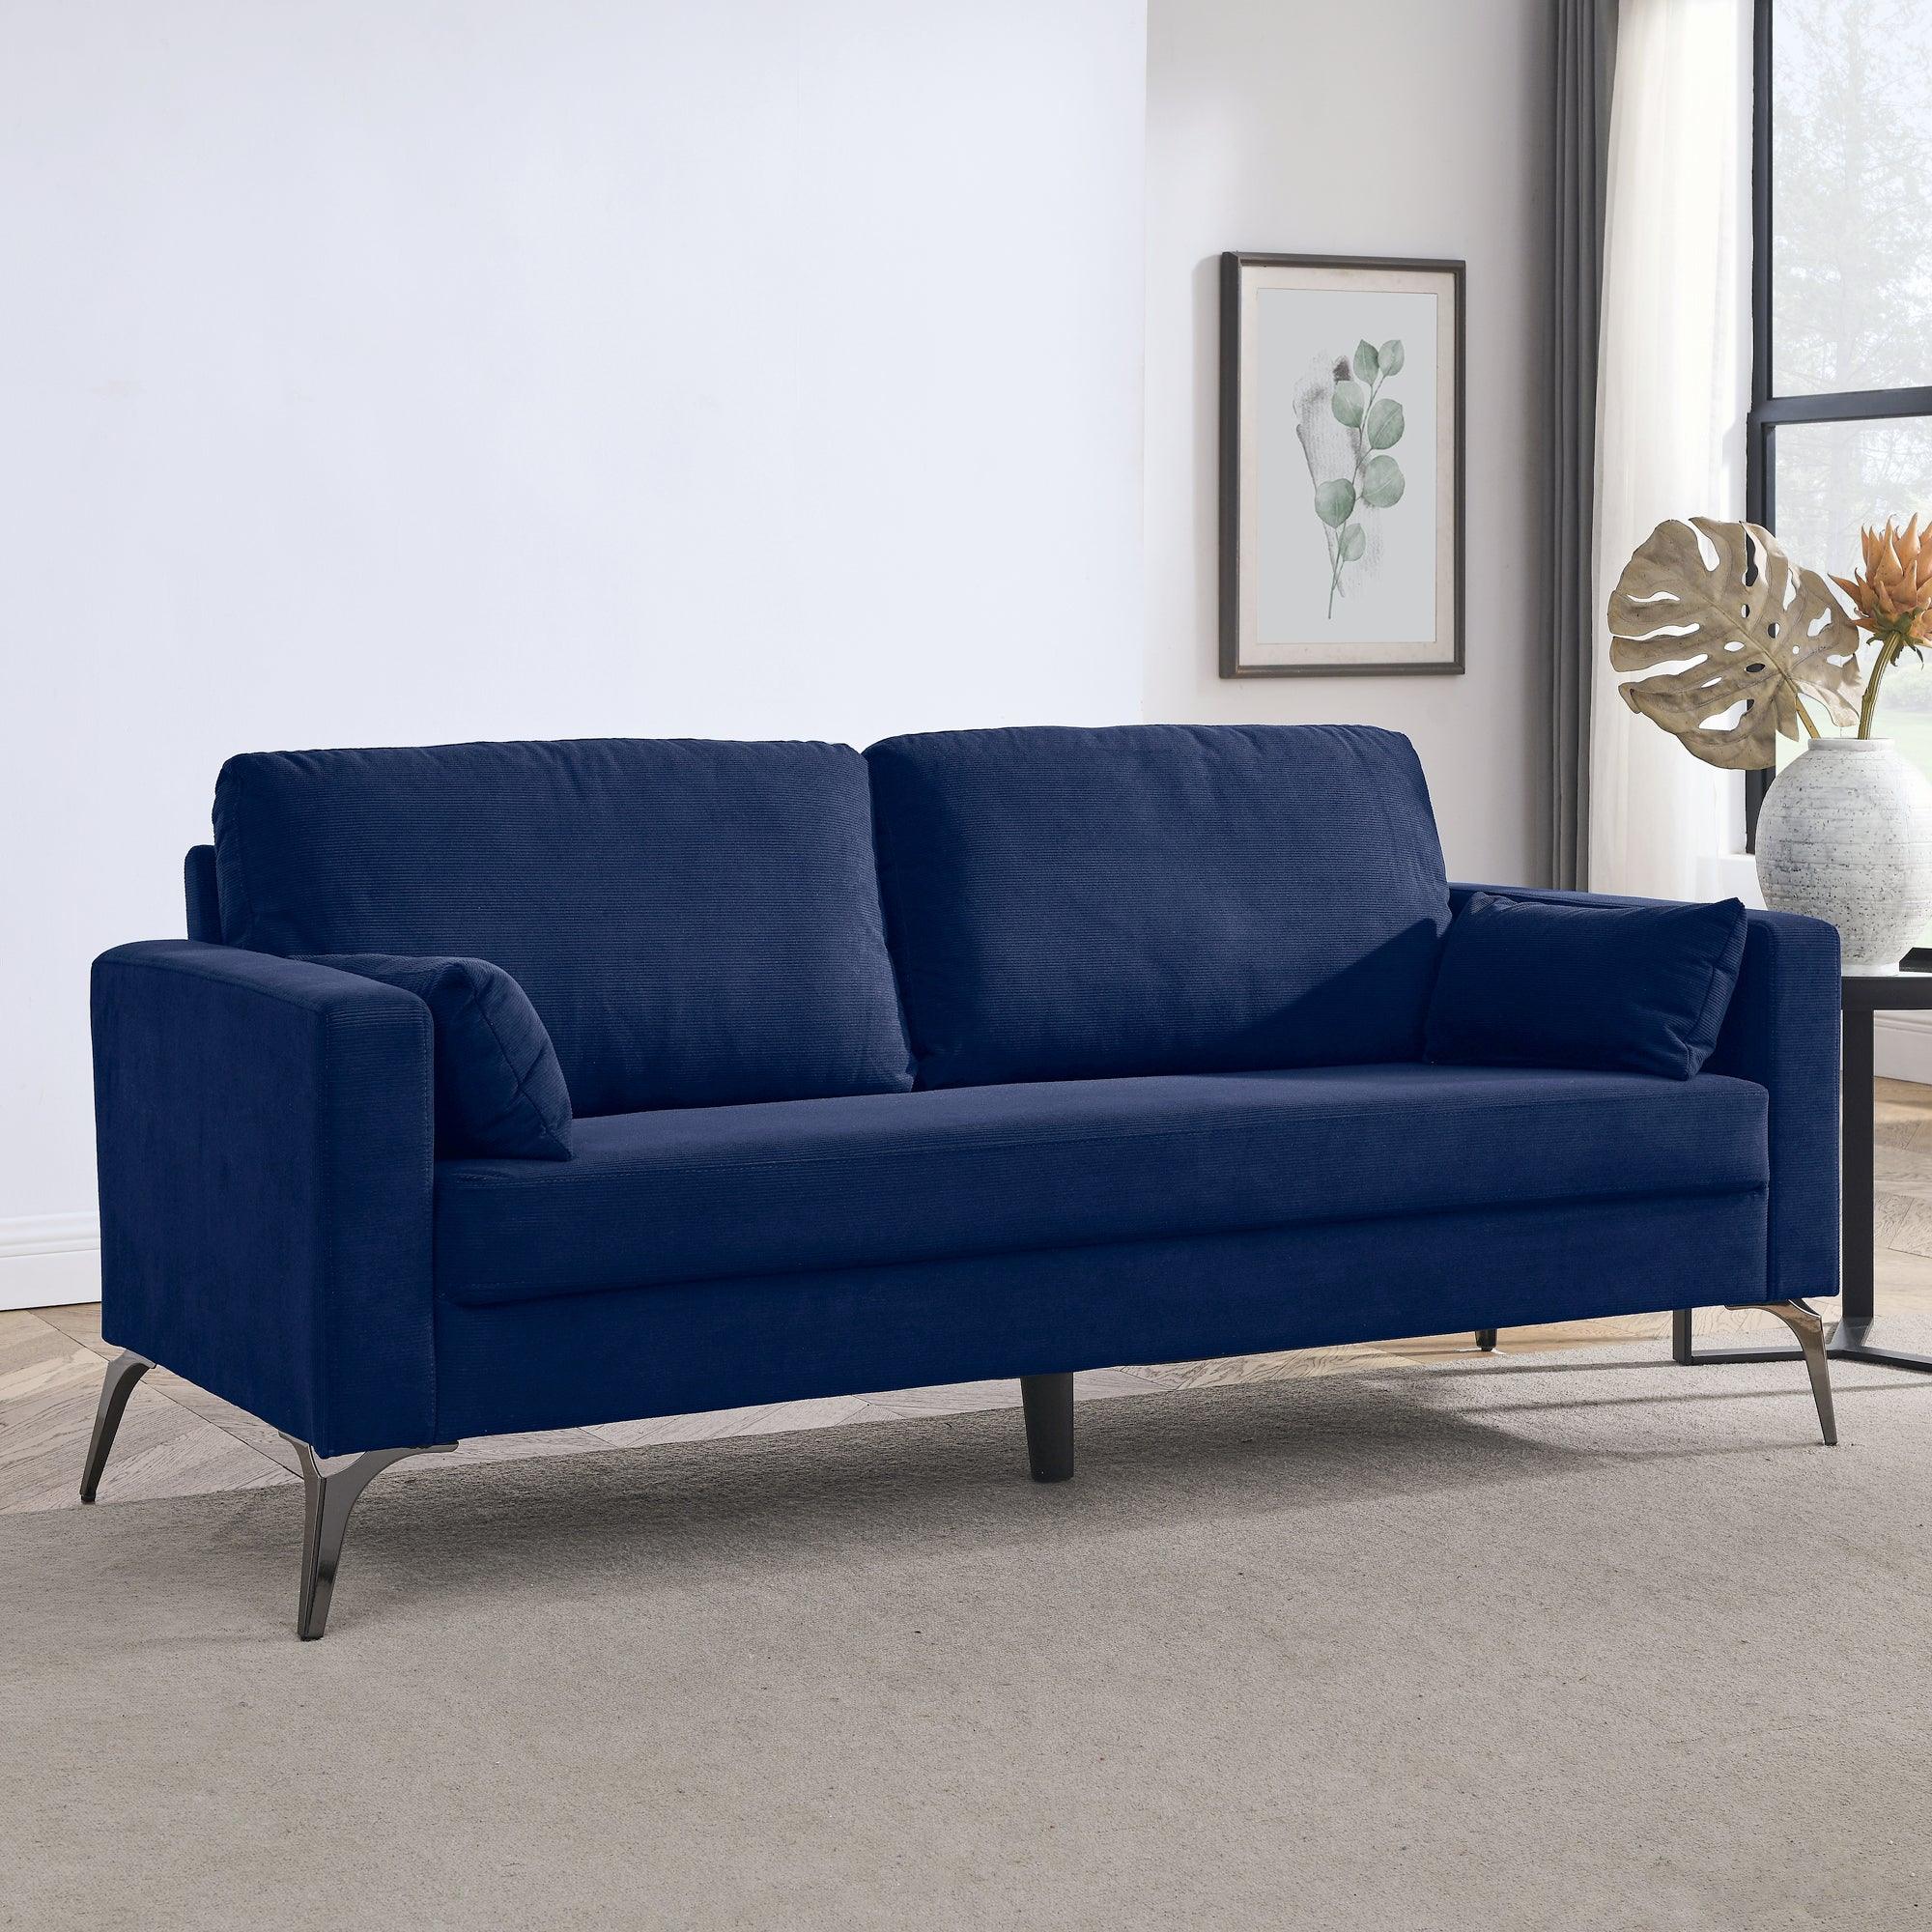 🆓🚛 3-Seater Sofa With Square Arms and Tight Back, With Two Small Pillows, Corduroy Navy